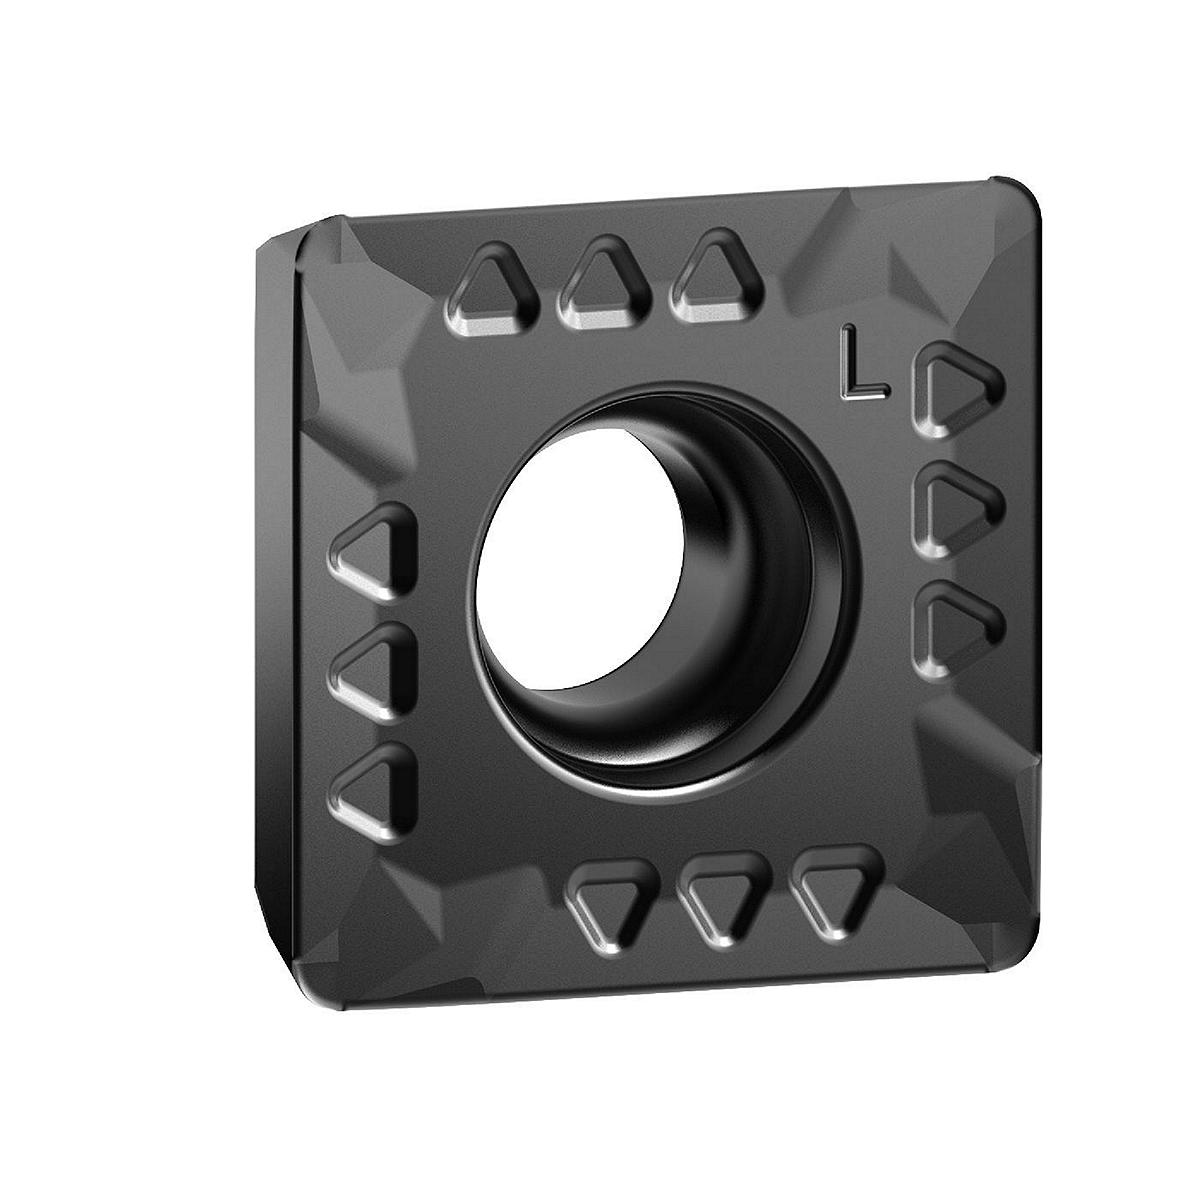 Slot milling insert with four cutting edges, precision ground